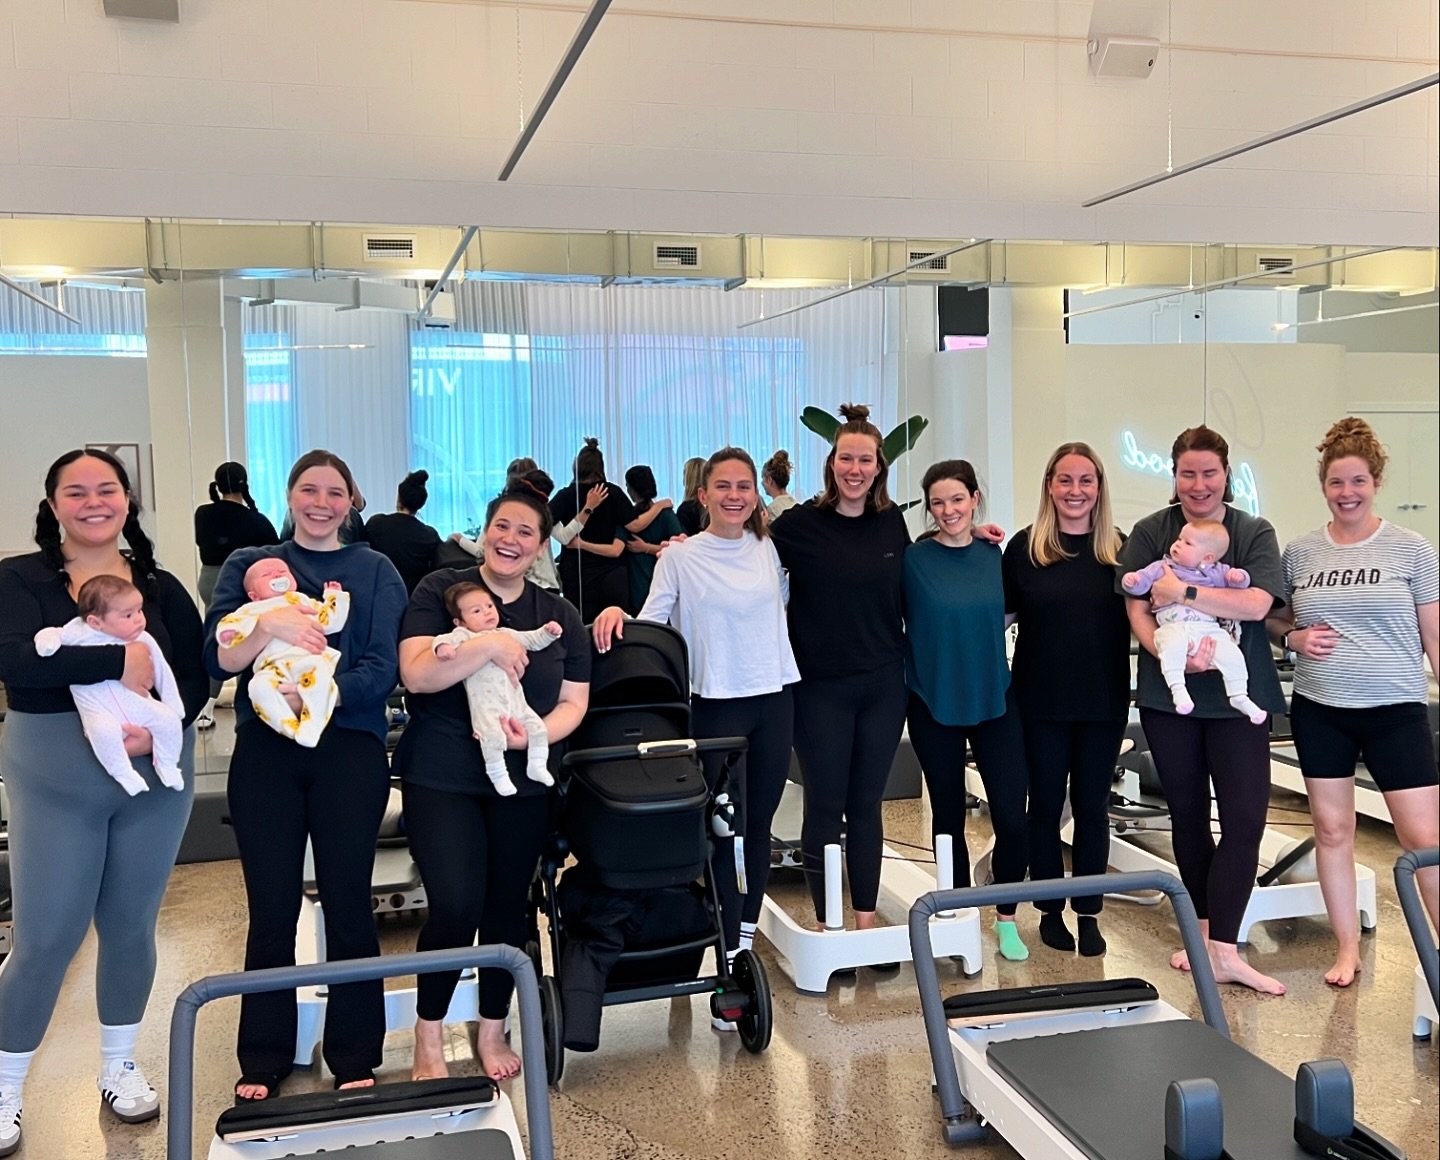 Such a vibe at our Feel Good Baby class today with our pre and postnatal clients! ✨🩵💙

Our Feel Good Baby class is designed for mums and a mums to be. It&rsquo;s a safe space for you to move your body and feel good for doing something for yourself,